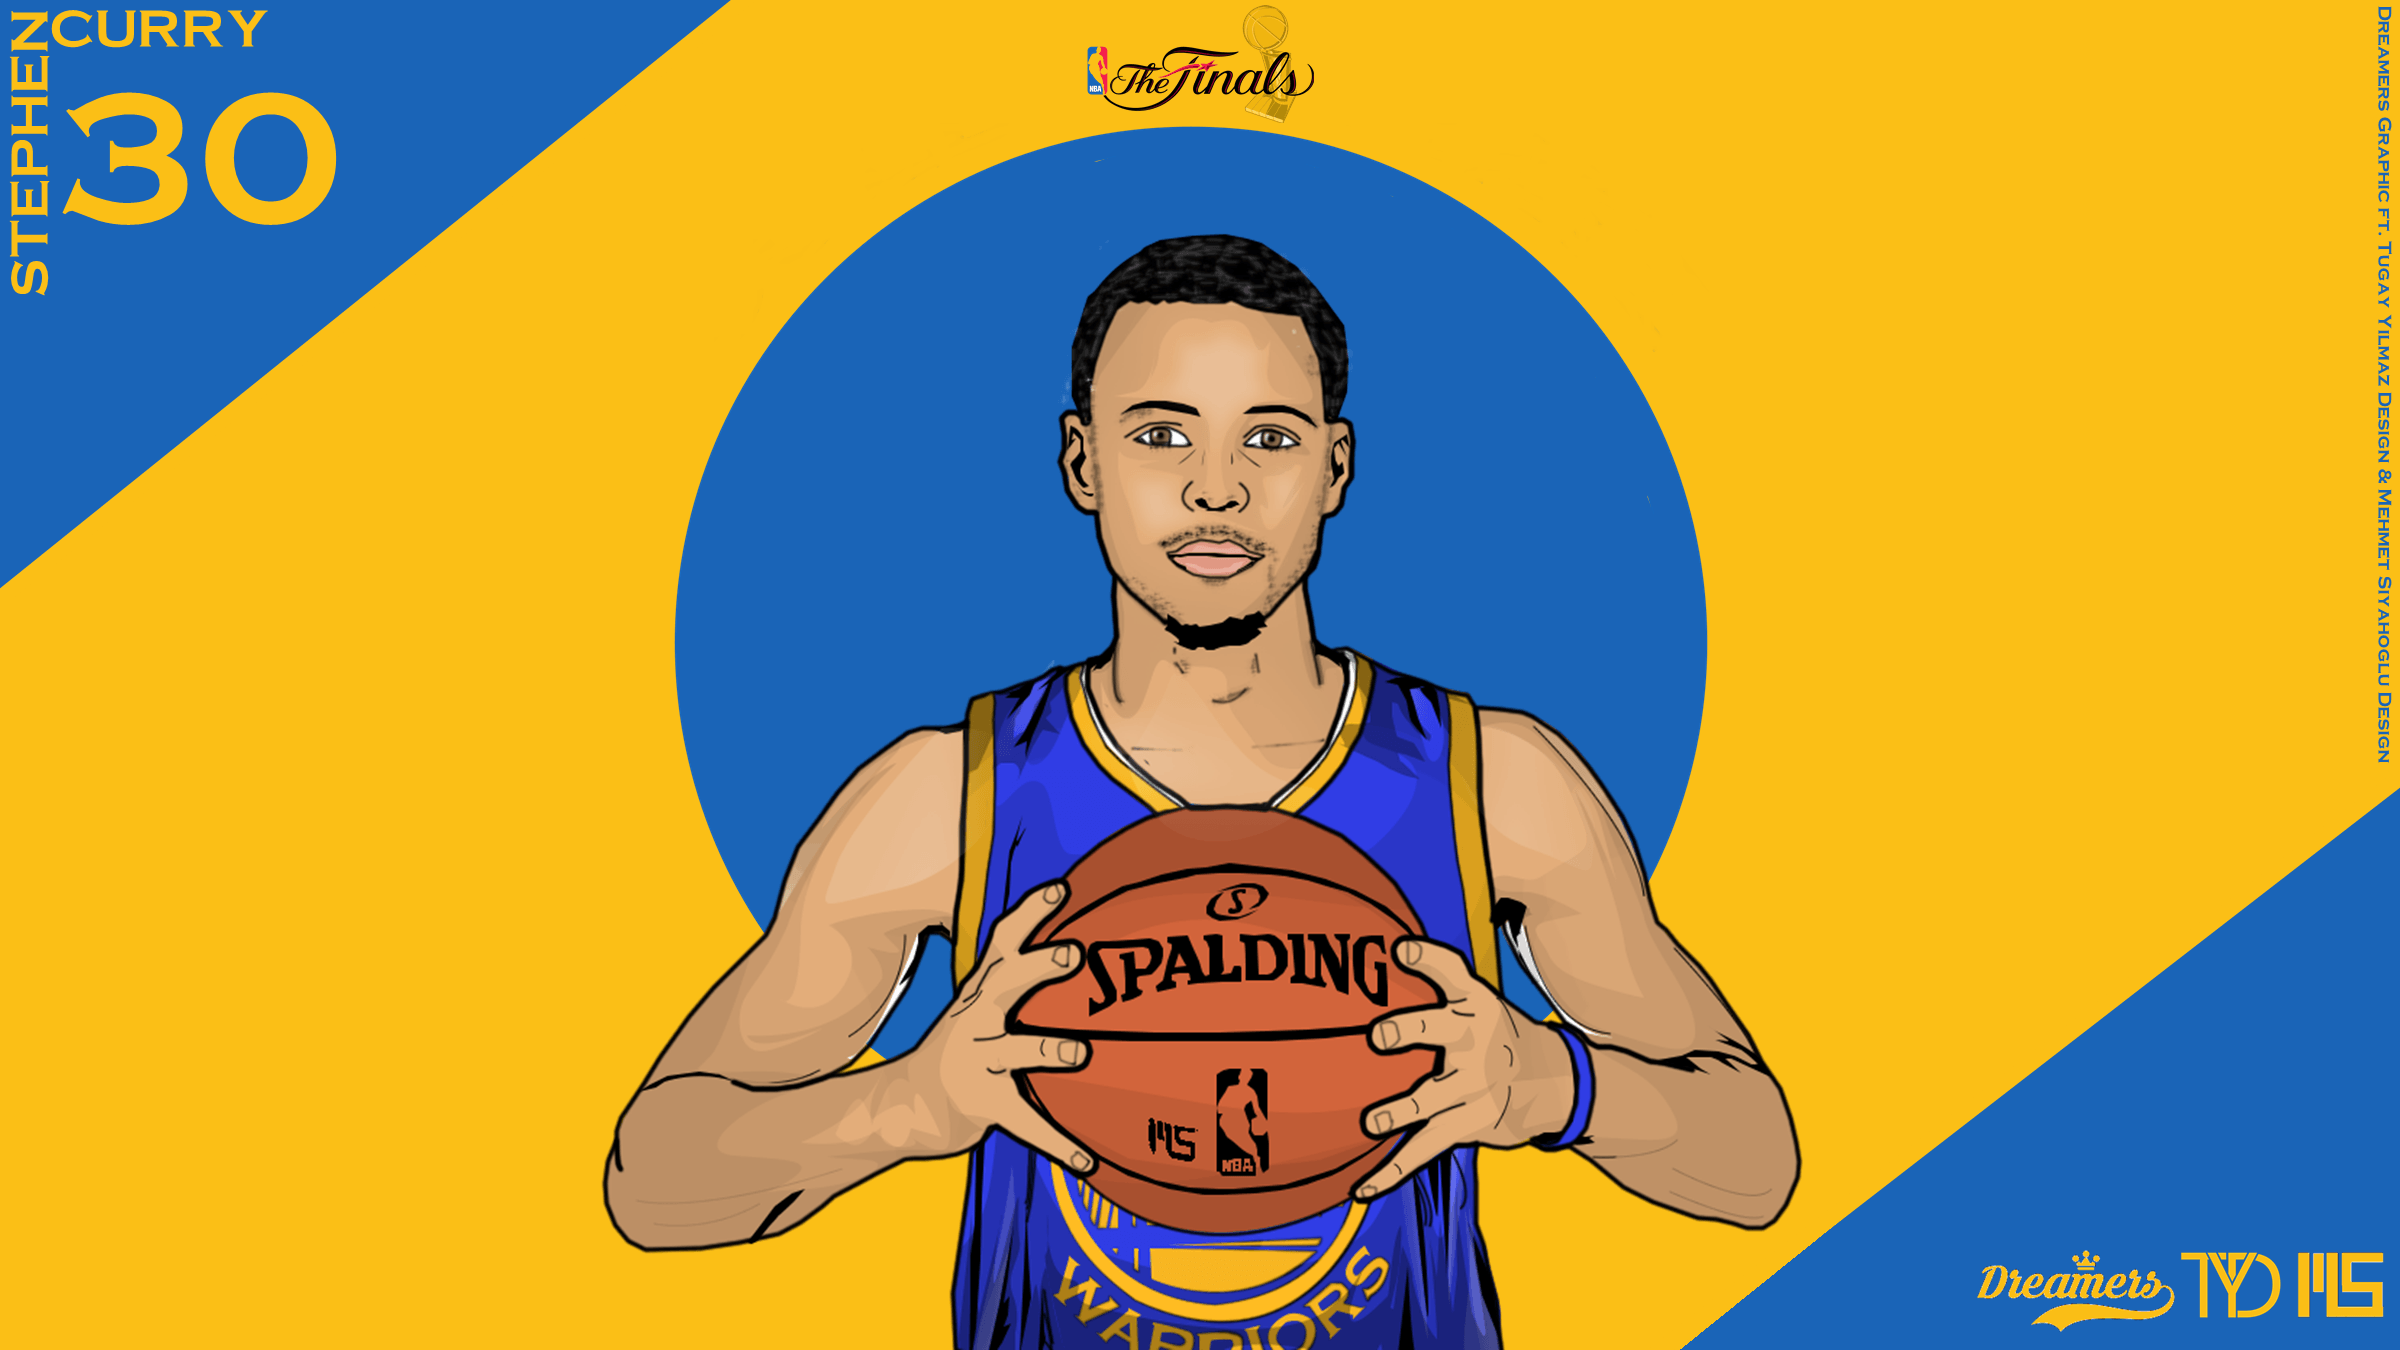 Stephen Curry Wallpaper Art Apk Download for Android Latest version 10  comandromodev660614app738340